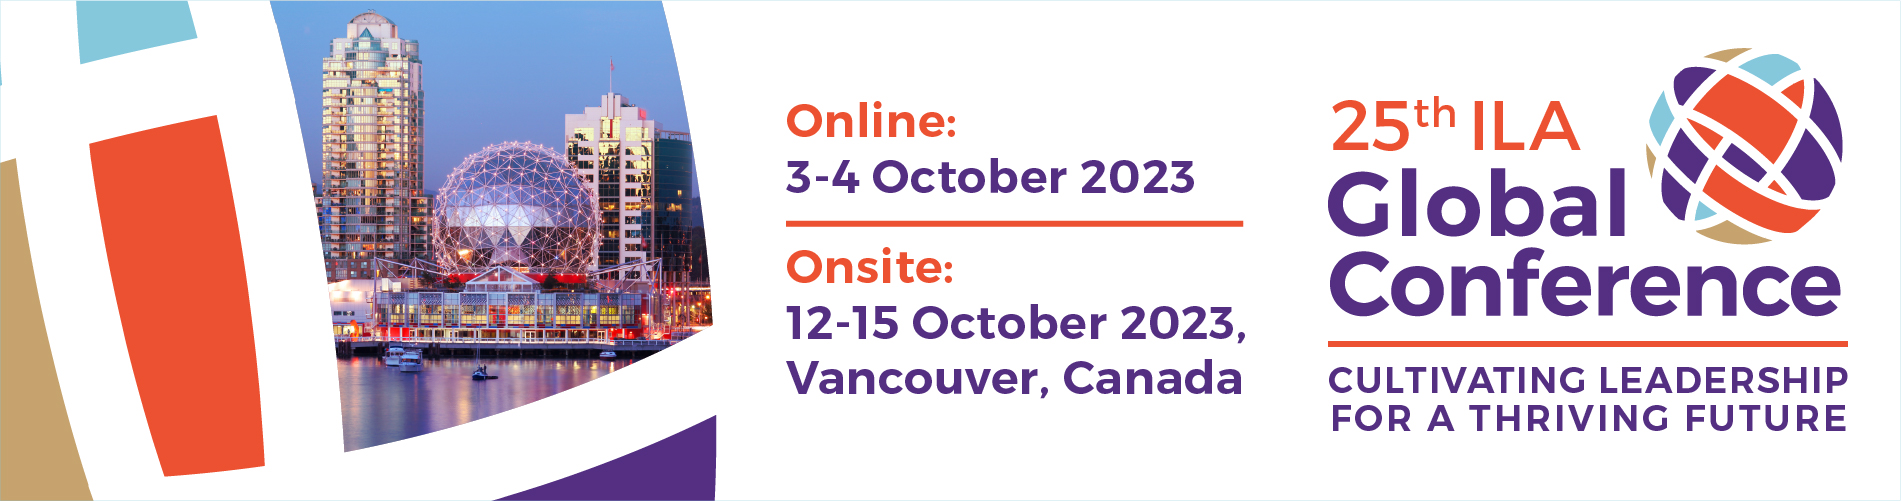 ILA's 25th Annual Global Conference, Vancouver, Canada and Online